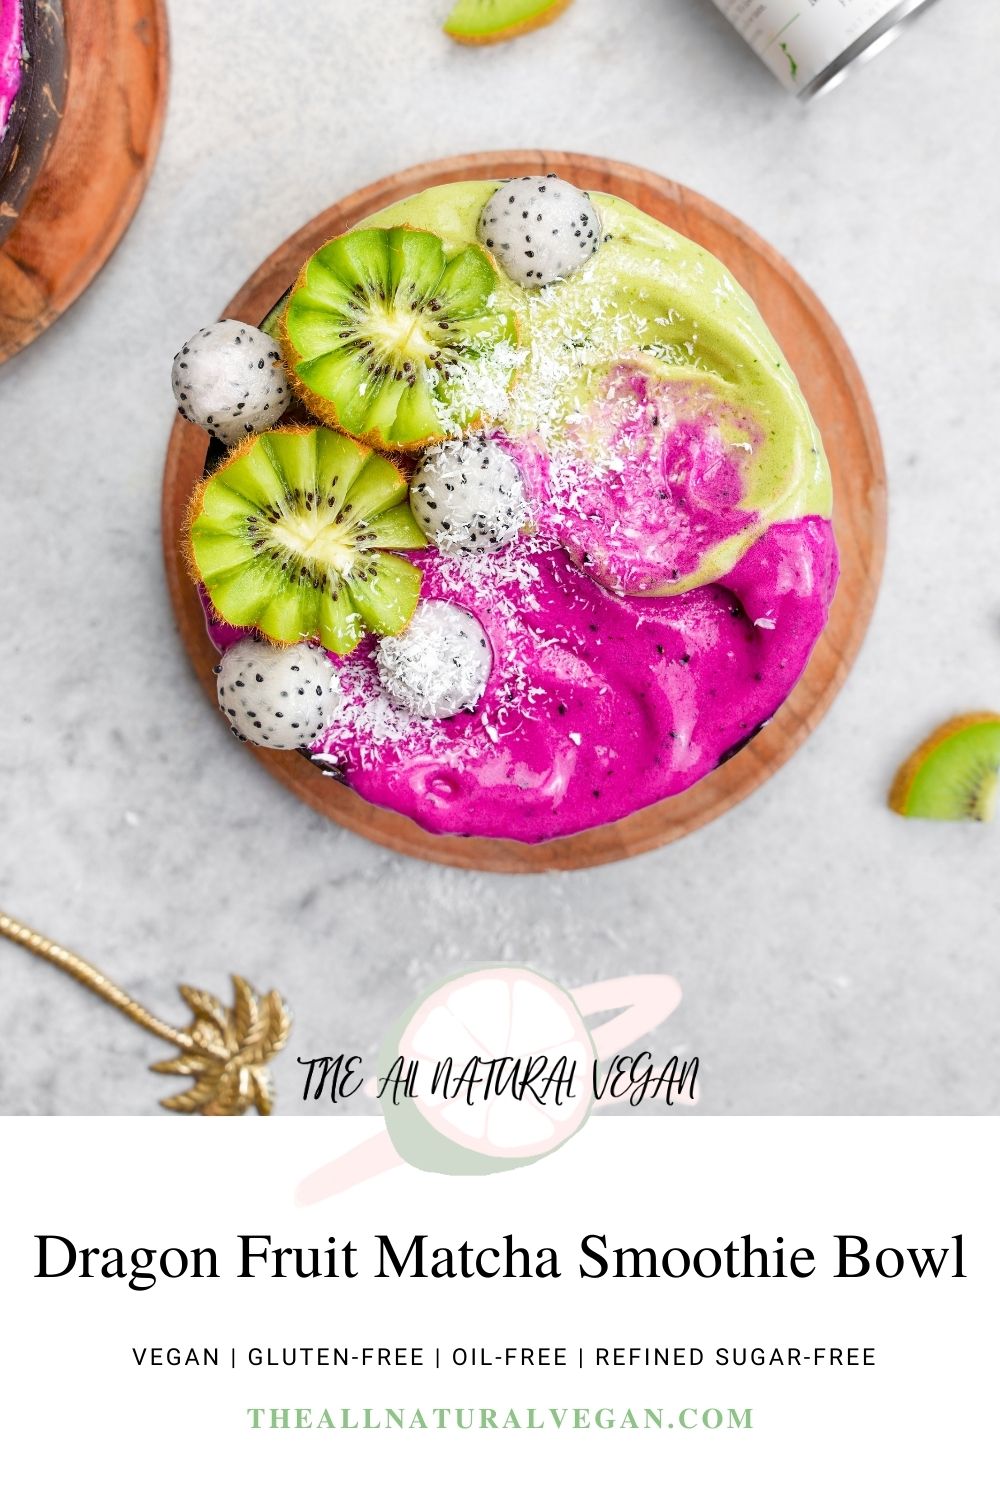 the dragon fruit matcha smoothie bowl recipe card stating this recipe is vegan, gluten-free, oil-free, and refined augar-free